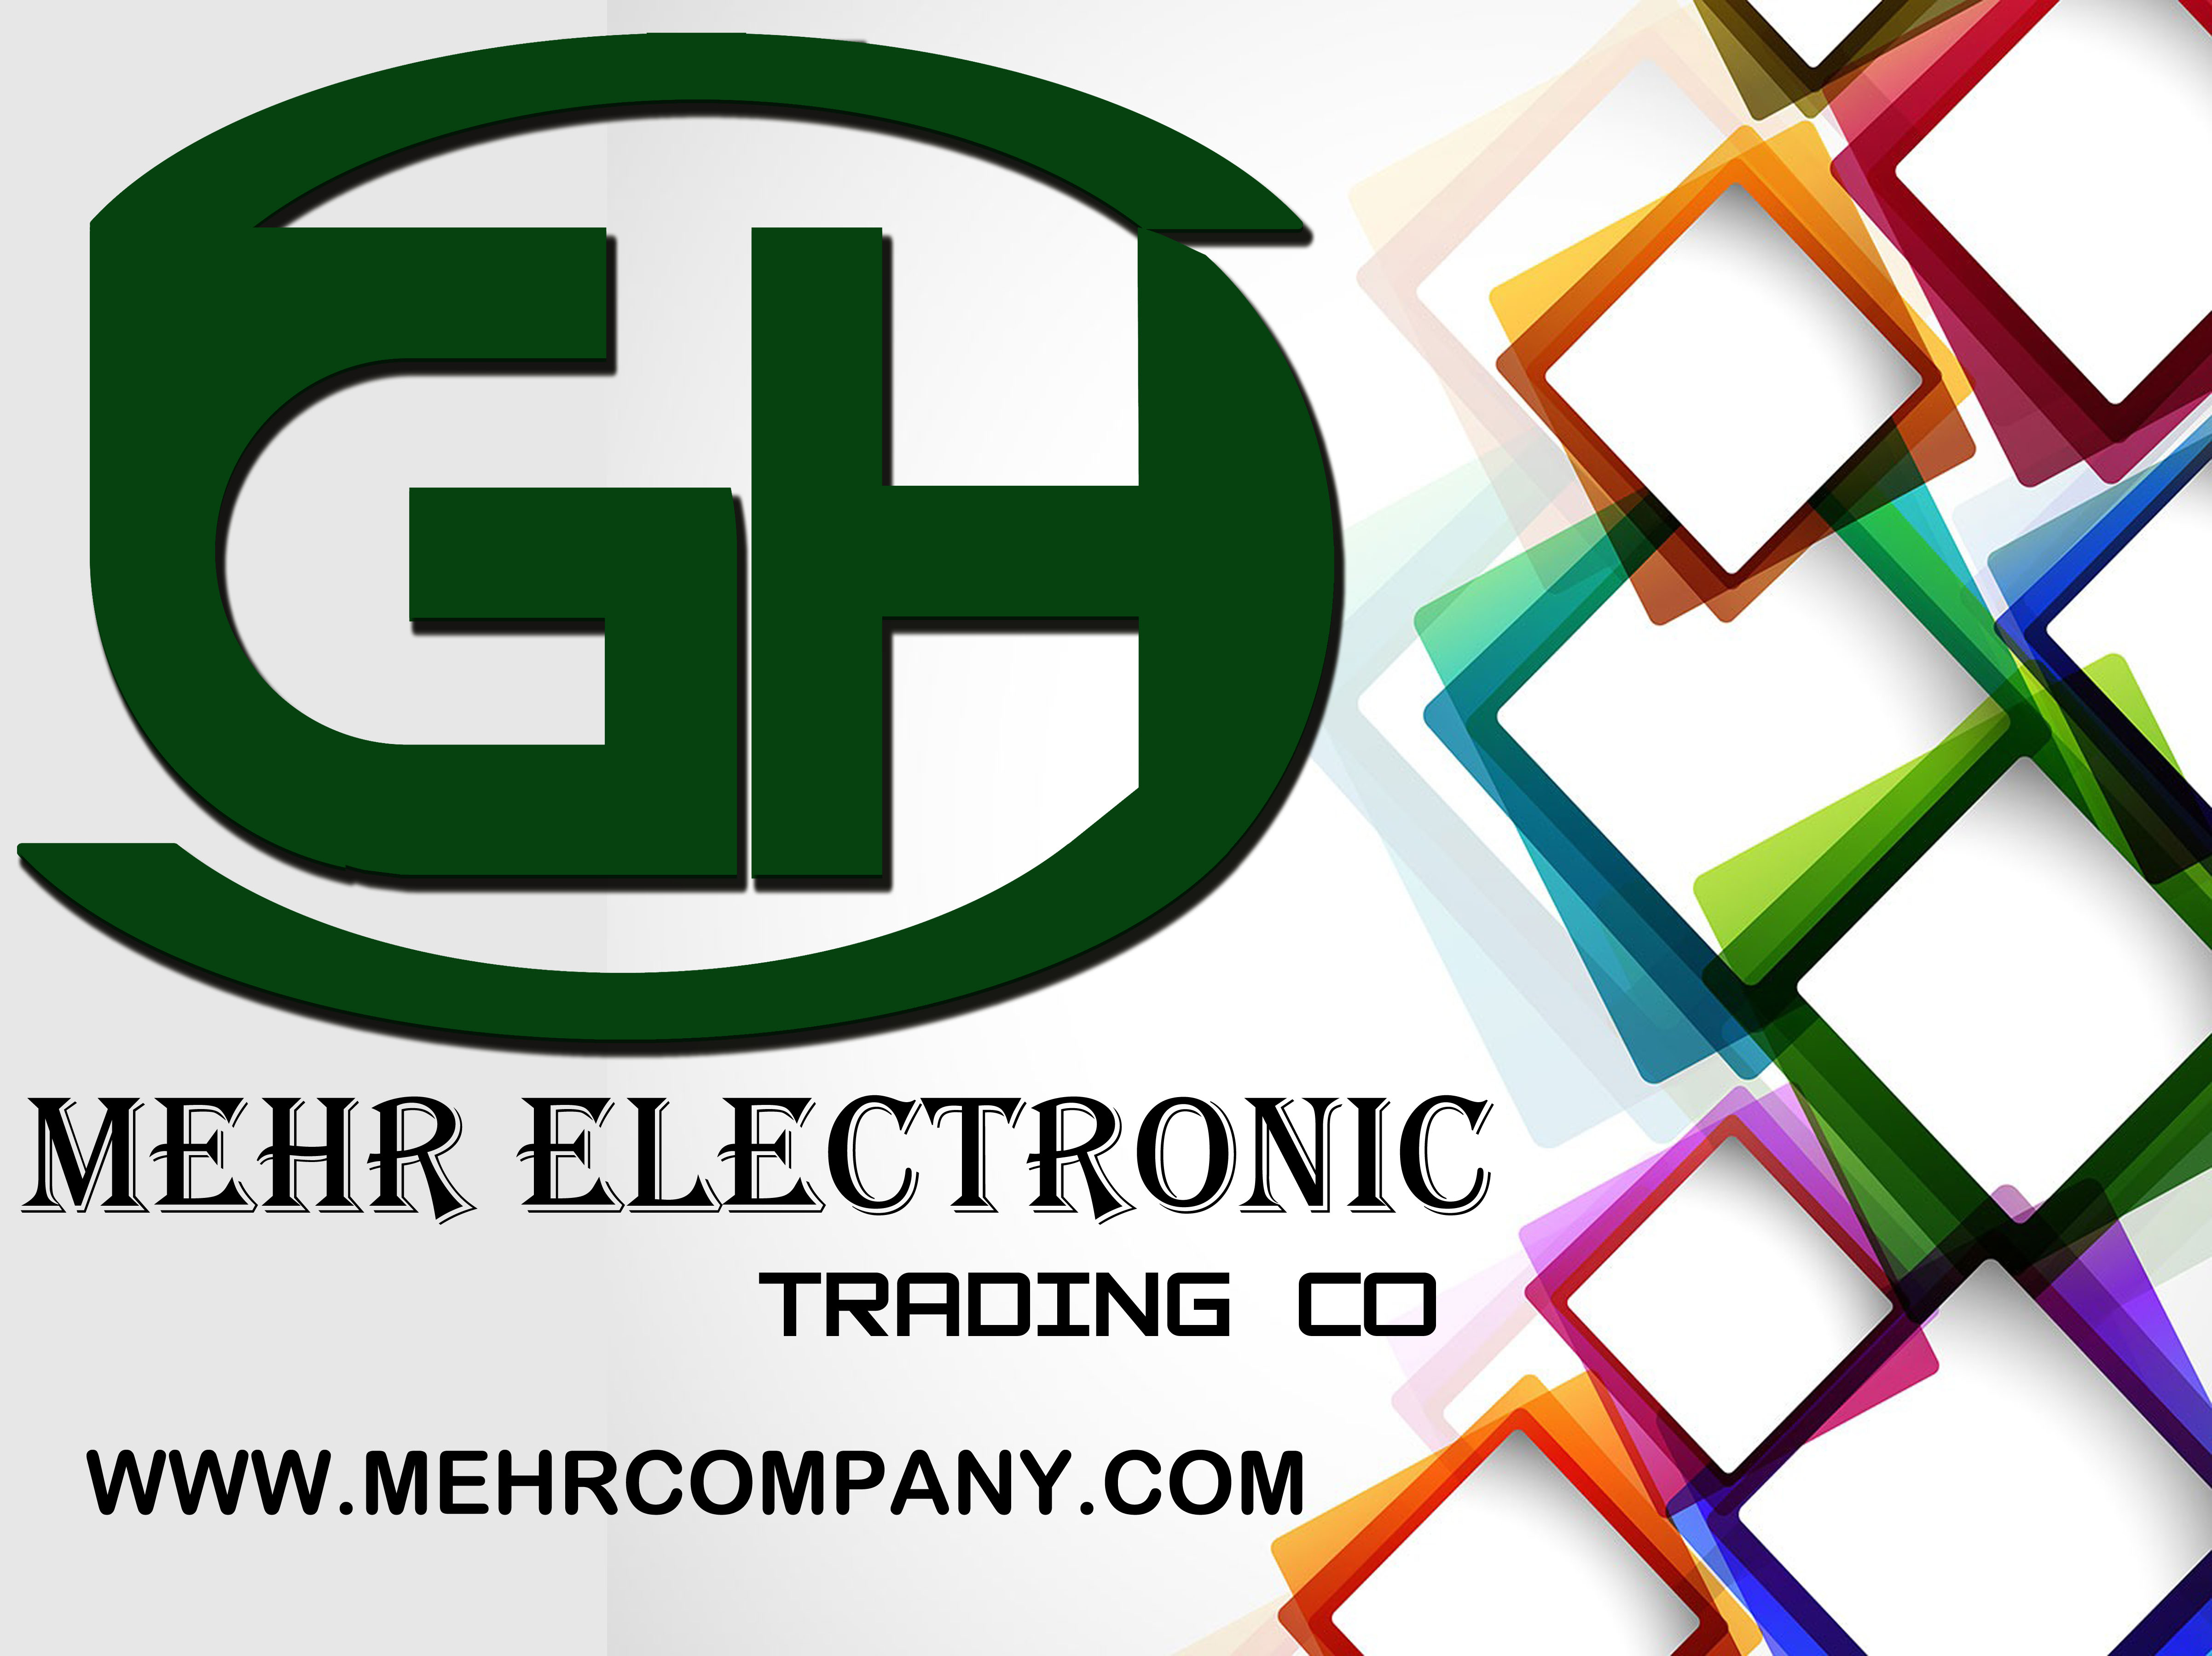 MEHR ELECTRONIC